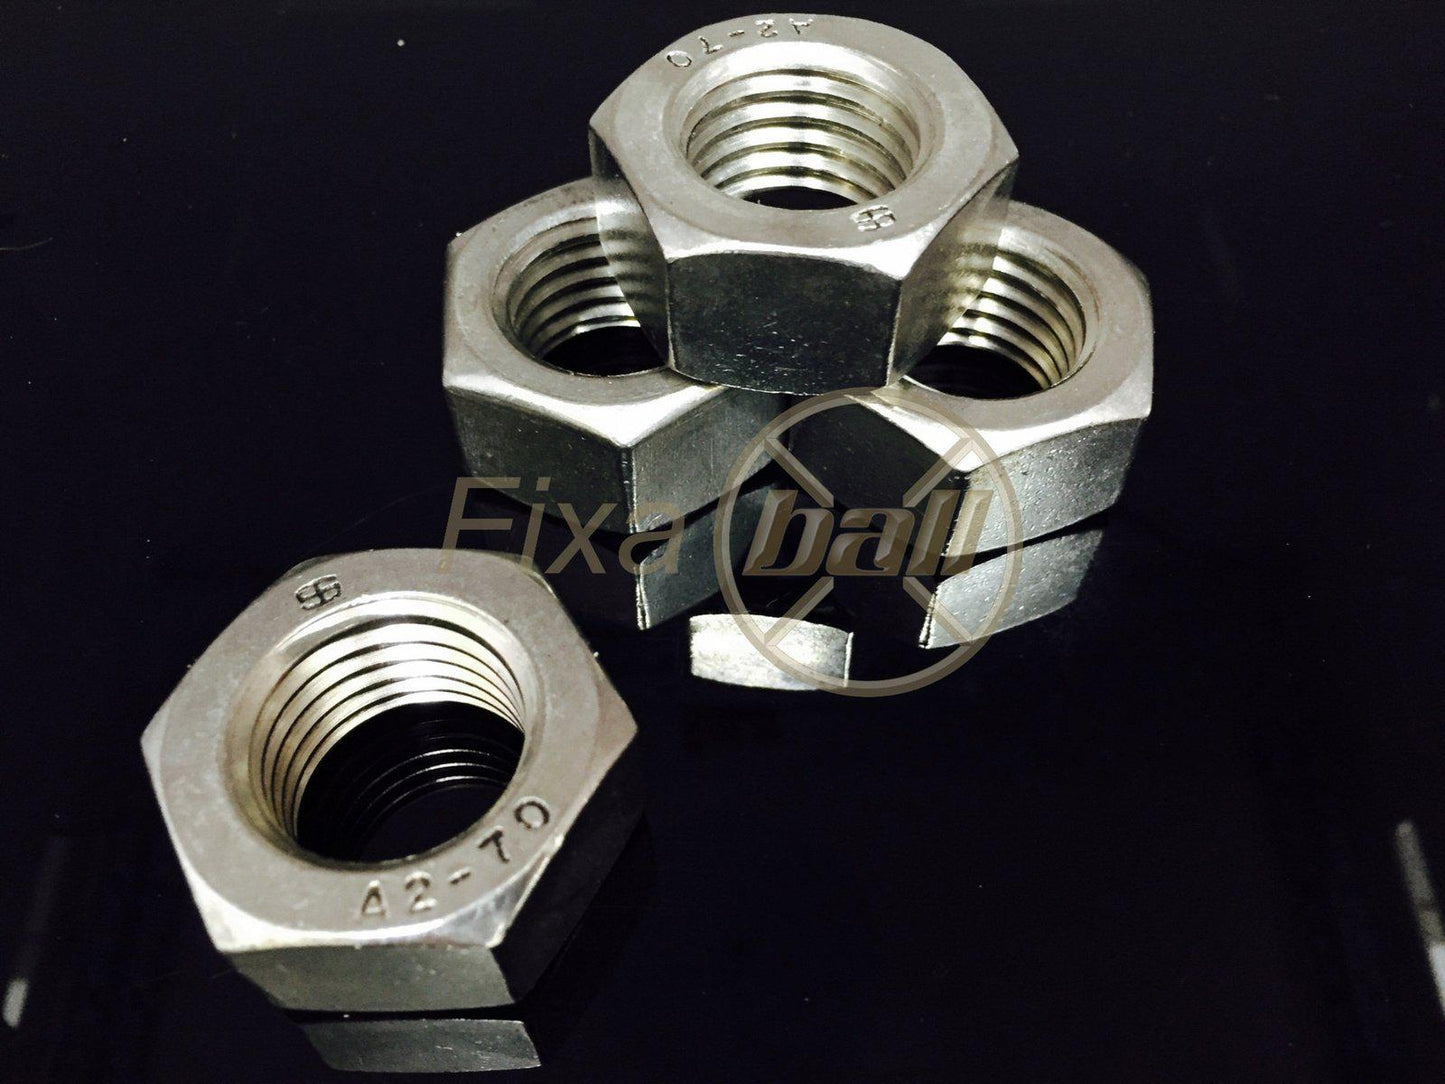 M2 - M12, Full Hex Nut, A2/ 304 Stainless Steel, DIN 934. Nuts M2 - M12, Full Hex Nut, A2/ 304 Stainless Steel, DIN 934. Full Nuts